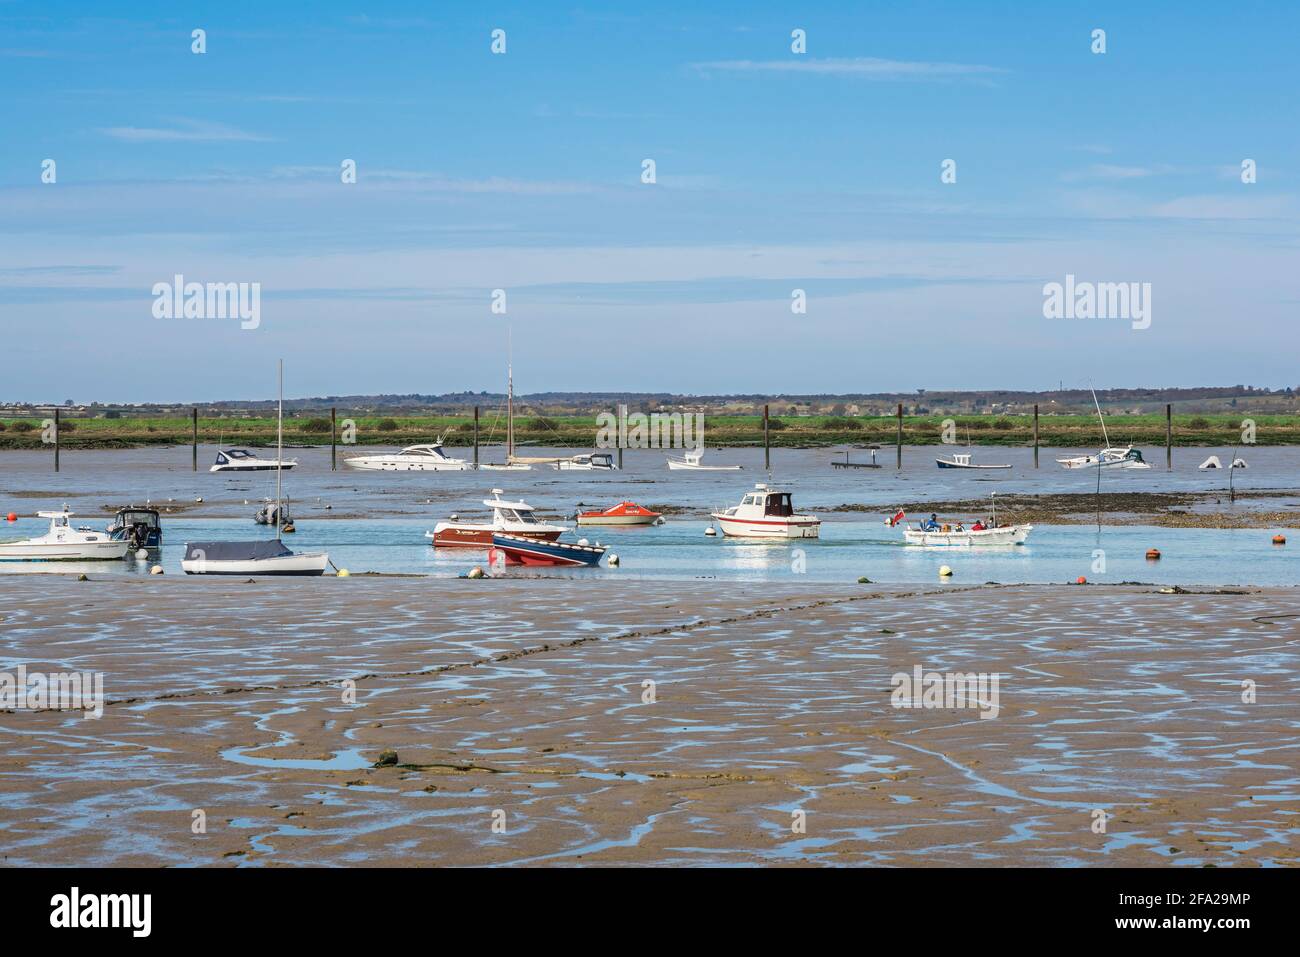 England East Anglia coast, view at low tide of the River Blackwater and mudflats at Mersea Island on the Essex coast, England, UK. Stock Photo